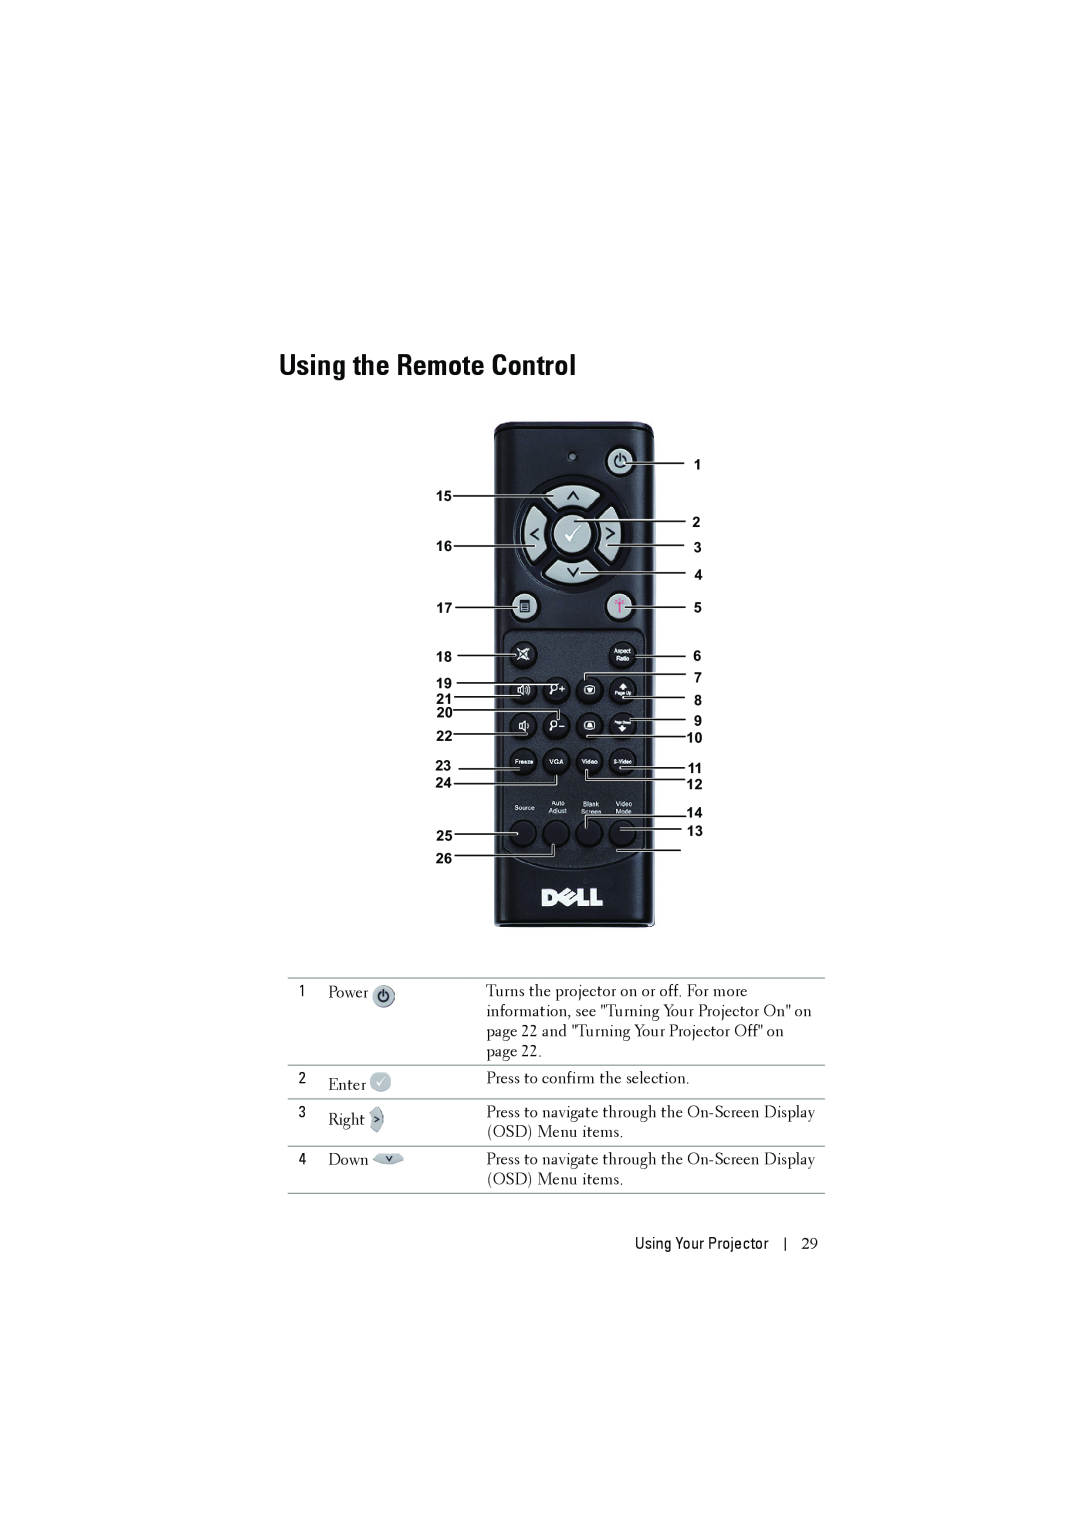 Dell S300W manual Using the Remote Control, Using Your Projector 